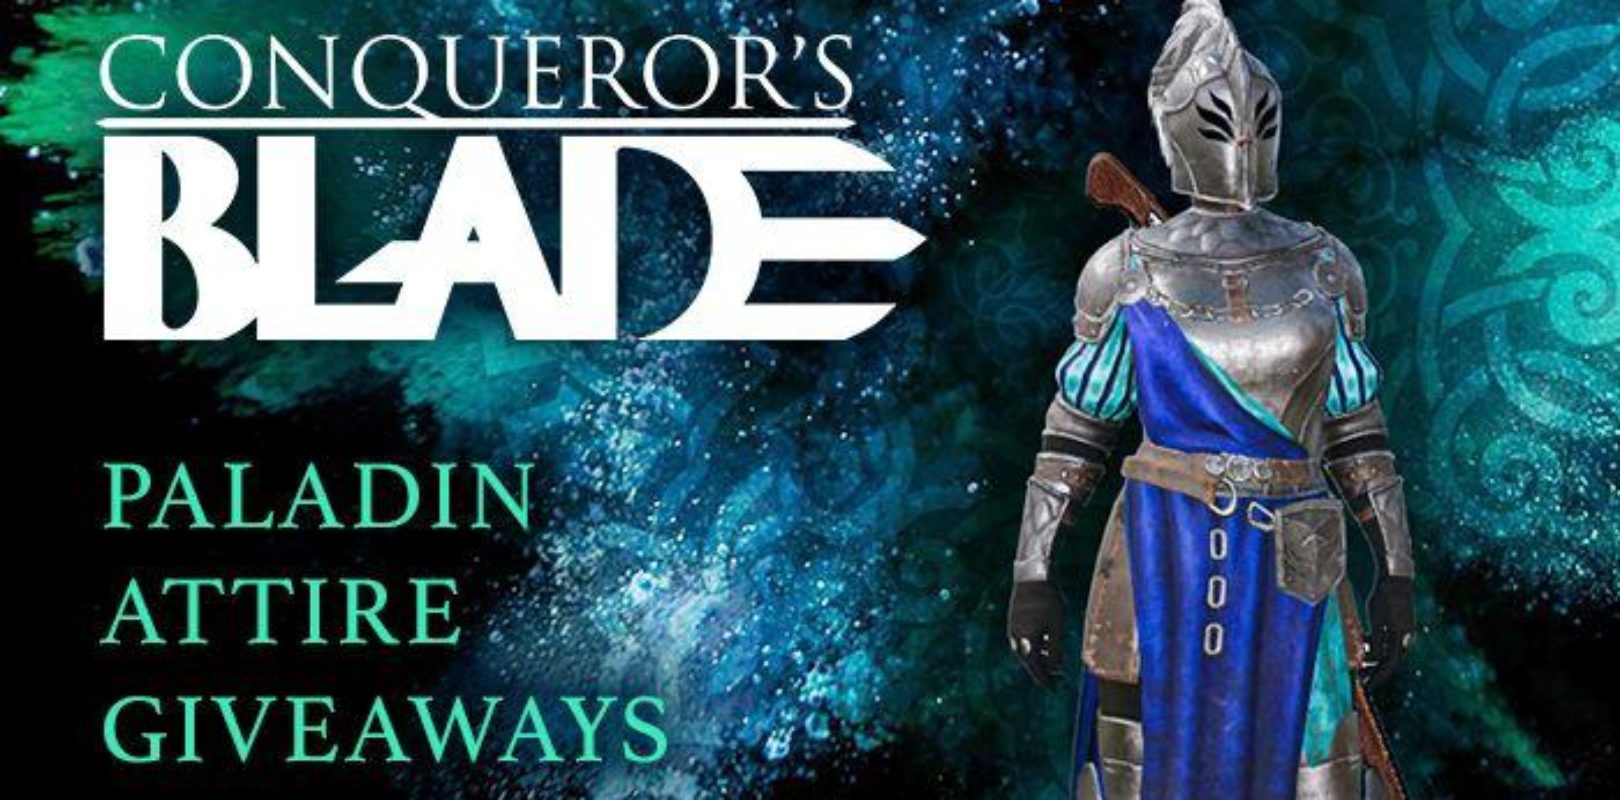 Conqueror S Blade Paladin Armor Giveaway Ended Pivotal Gamers - knight armor uniform roblox